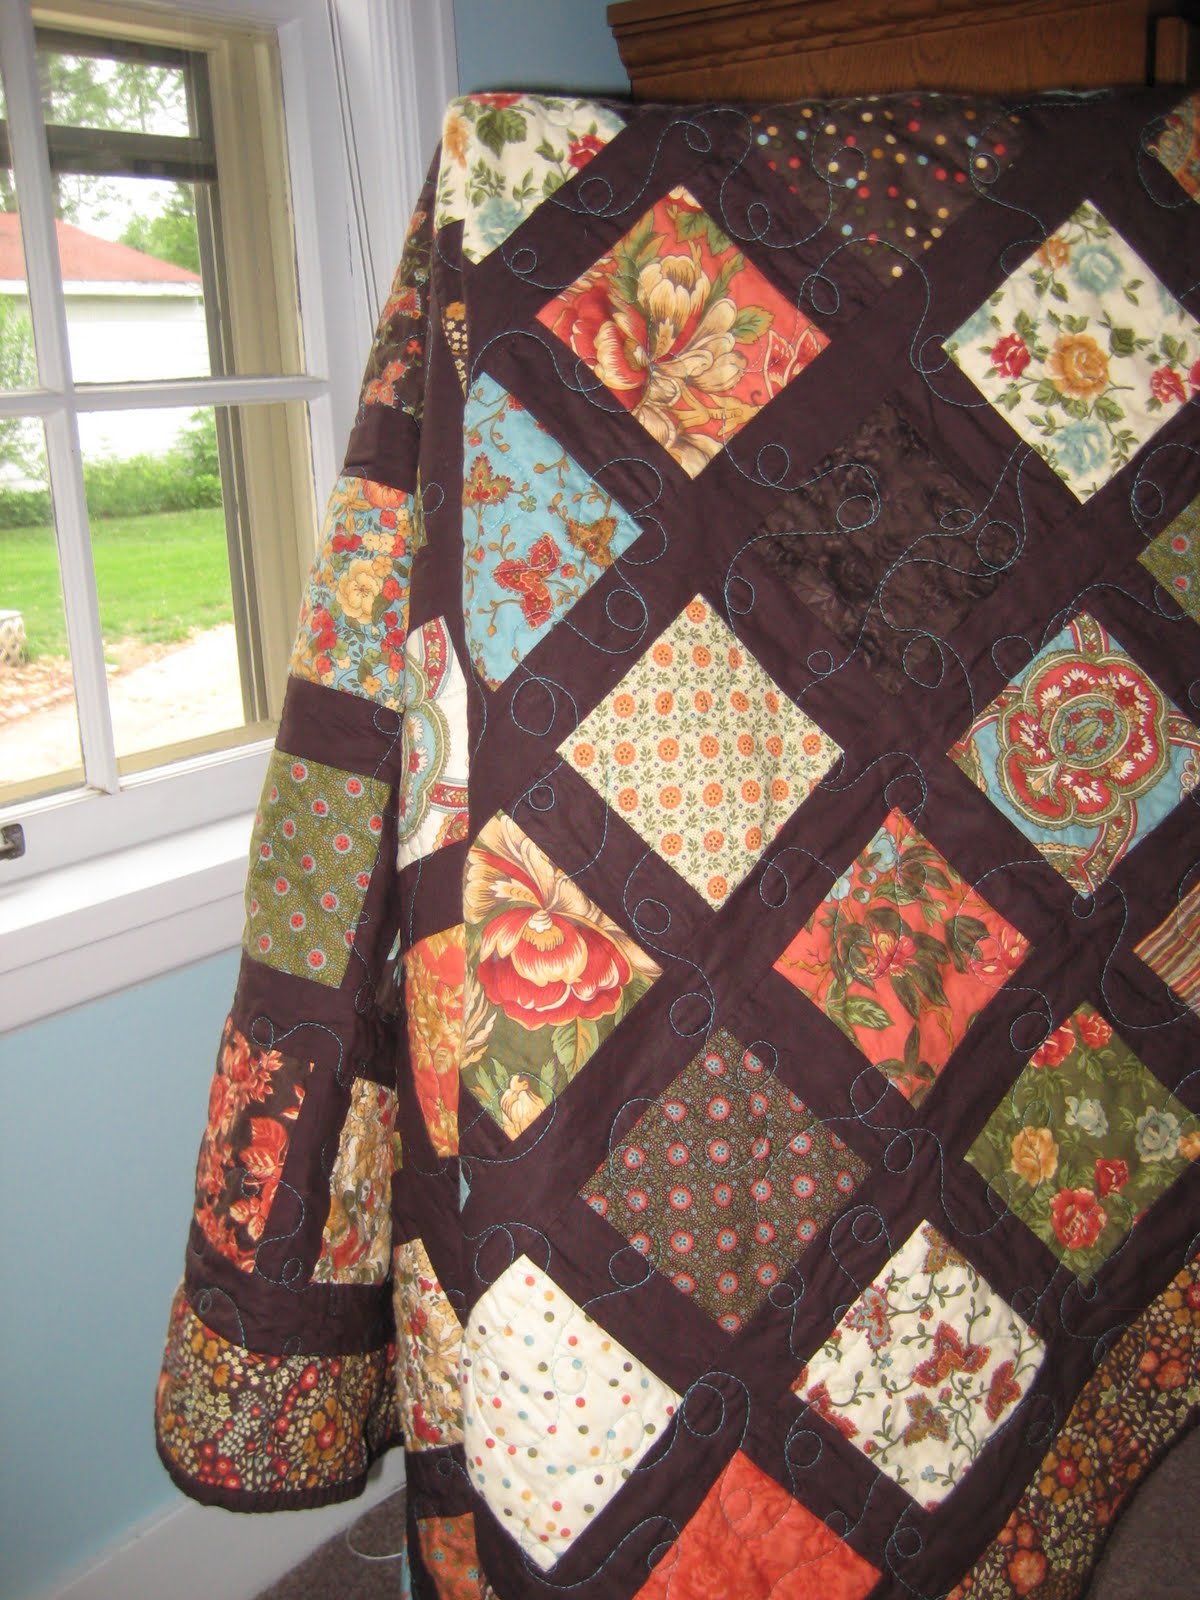 The Girl Who Quilts: Sonnet lap quilt